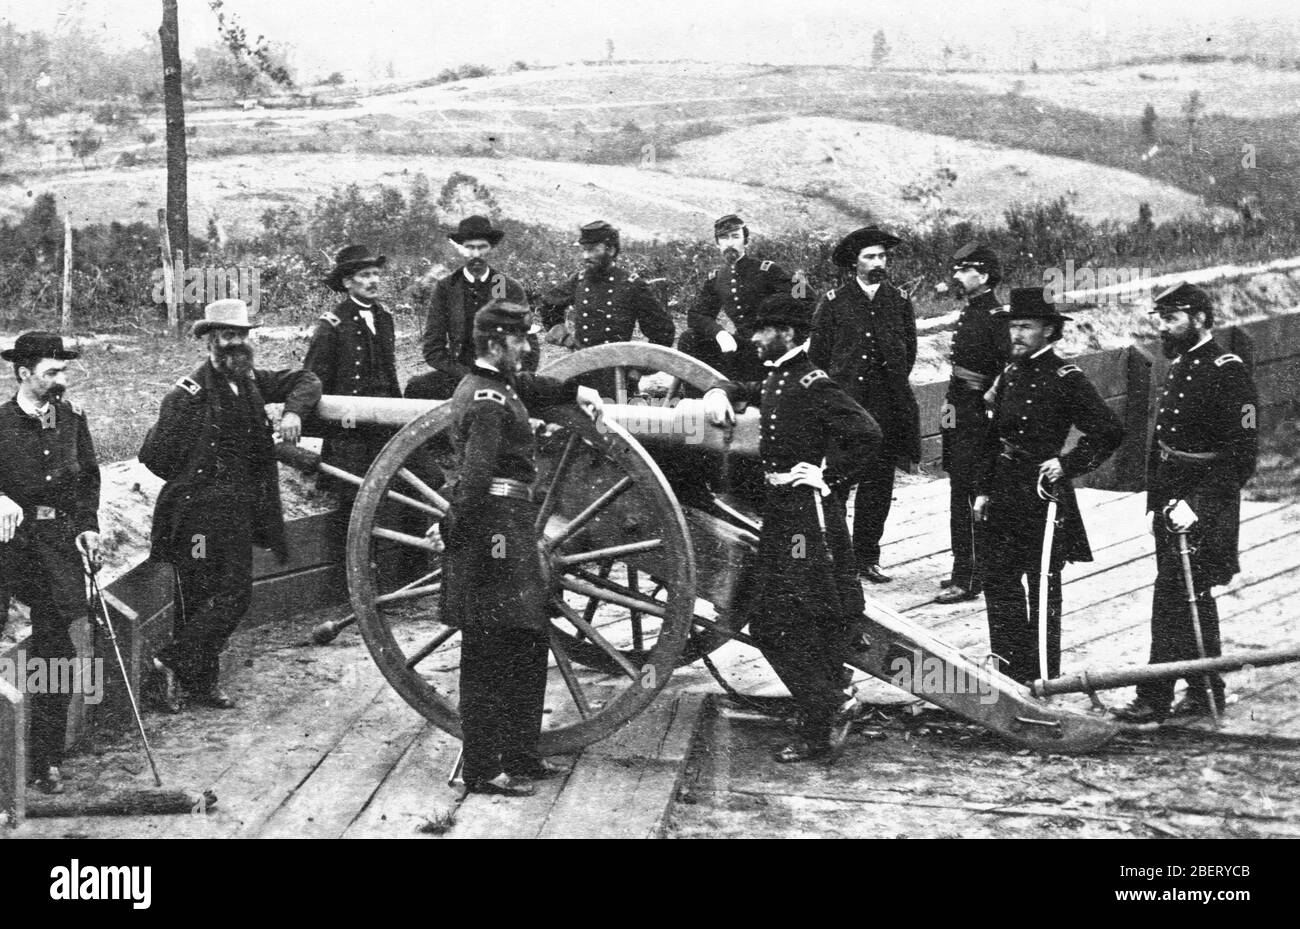 US Civil War -- Major-General William Tecumseh Sherman and his staff on July 19, 1864, at Union Fort #7, during the siege of Atlanta. Sherman is leaning on the cannon's breech. After his capture of Atlanta, Sherman swept through Georgia, destroying everything of value to the Confederacy, thereby seriously weakening the Southern army's supporting supplies system.   To see my Civil War-related images, Search:  Prestor  vintage  Civil War Stock Photo